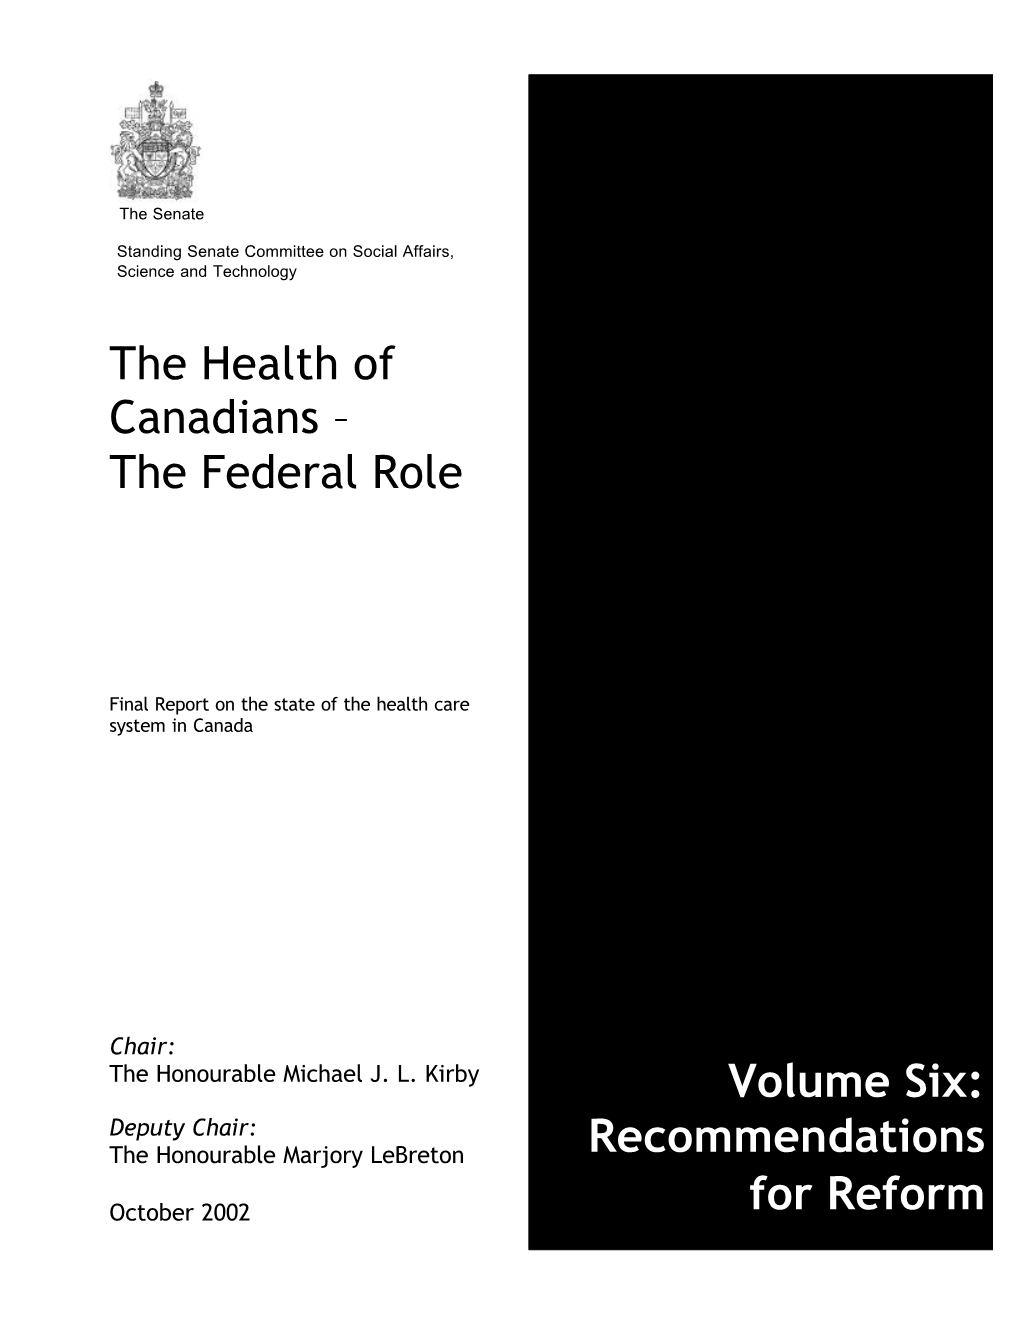 The Health of Canadians – the Federal Role